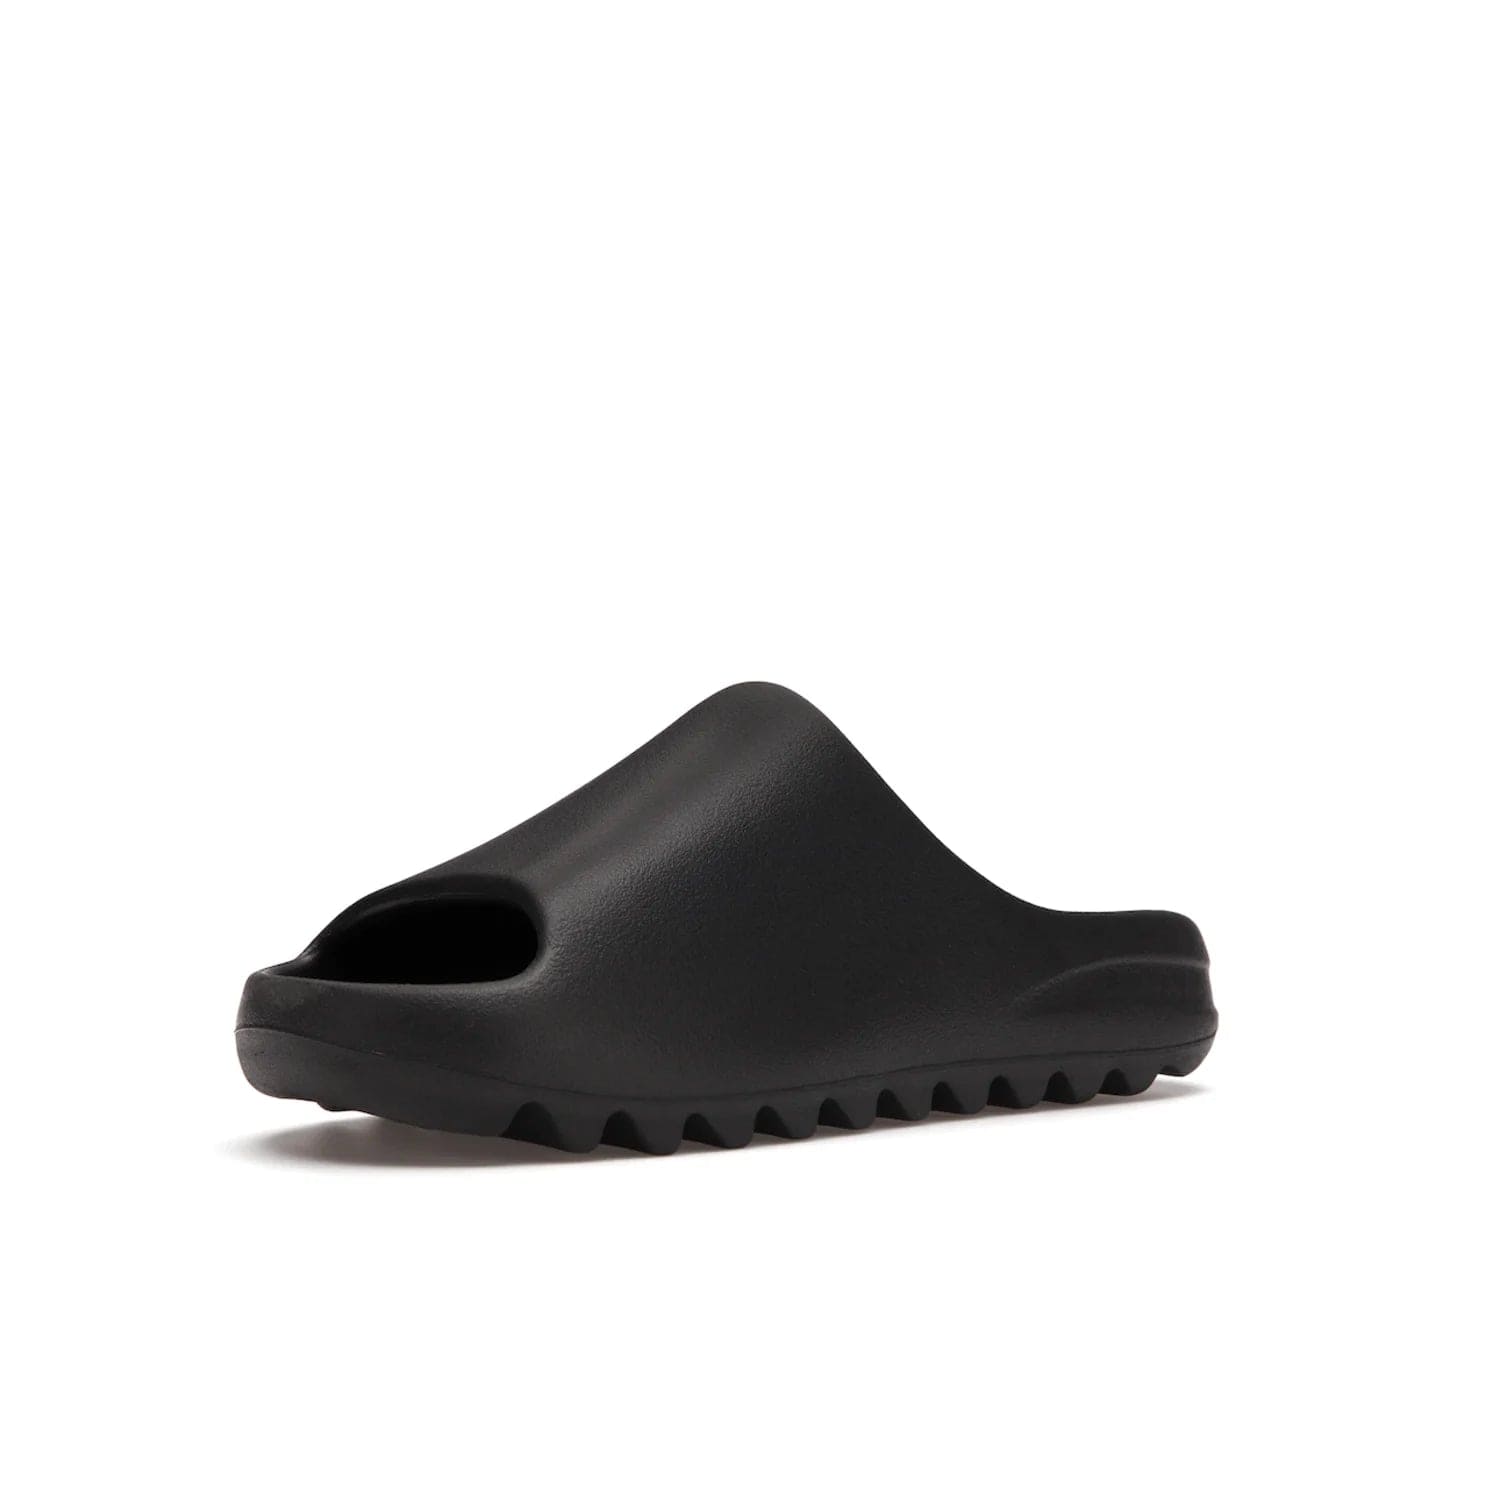 adidas Yeezy Slide Onyx - Image 15 - Only at www.BallersClubKickz.com - Step into comfort and style with the adidas Yeezy Slide Onyx. Featuring foam construction, an all-black colorway and a grooved outsole for stability and responsiveness, this versatile slide is a must-have for your collection.